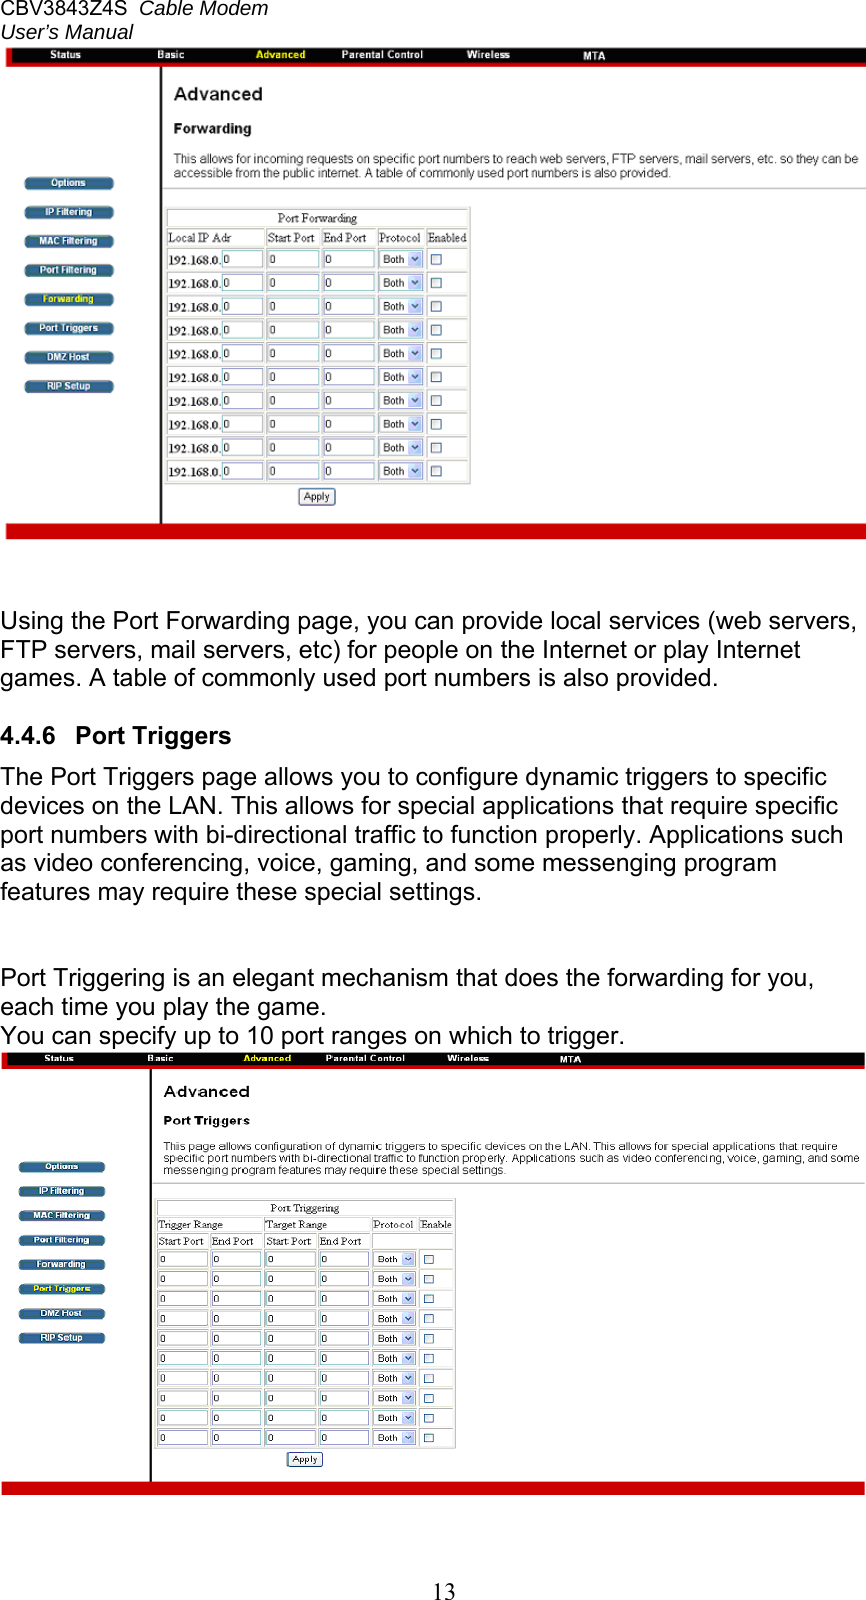 CBV3843Z4S  Cable Modem  User’s Manual   13   Using the Port Forwarding page, you can provide local services (web servers, FTP servers, mail servers, etc) for people on the Internet or play Internet games. A table of commonly used port numbers is also provided.  4.4.6  Port Triggers The Port Triggers page allows you to configure dynamic triggers to specific devices on the LAN. This allows for special applications that require specific port numbers with bi-directional traffic to function properly. Applications such as video conferencing, voice, gaming, and some messenging program features may require these special settings.    Port Triggering is an elegant mechanism that does the forwarding for you, each time you play the game. You can specify up to 10 port ranges on which to trigger.  